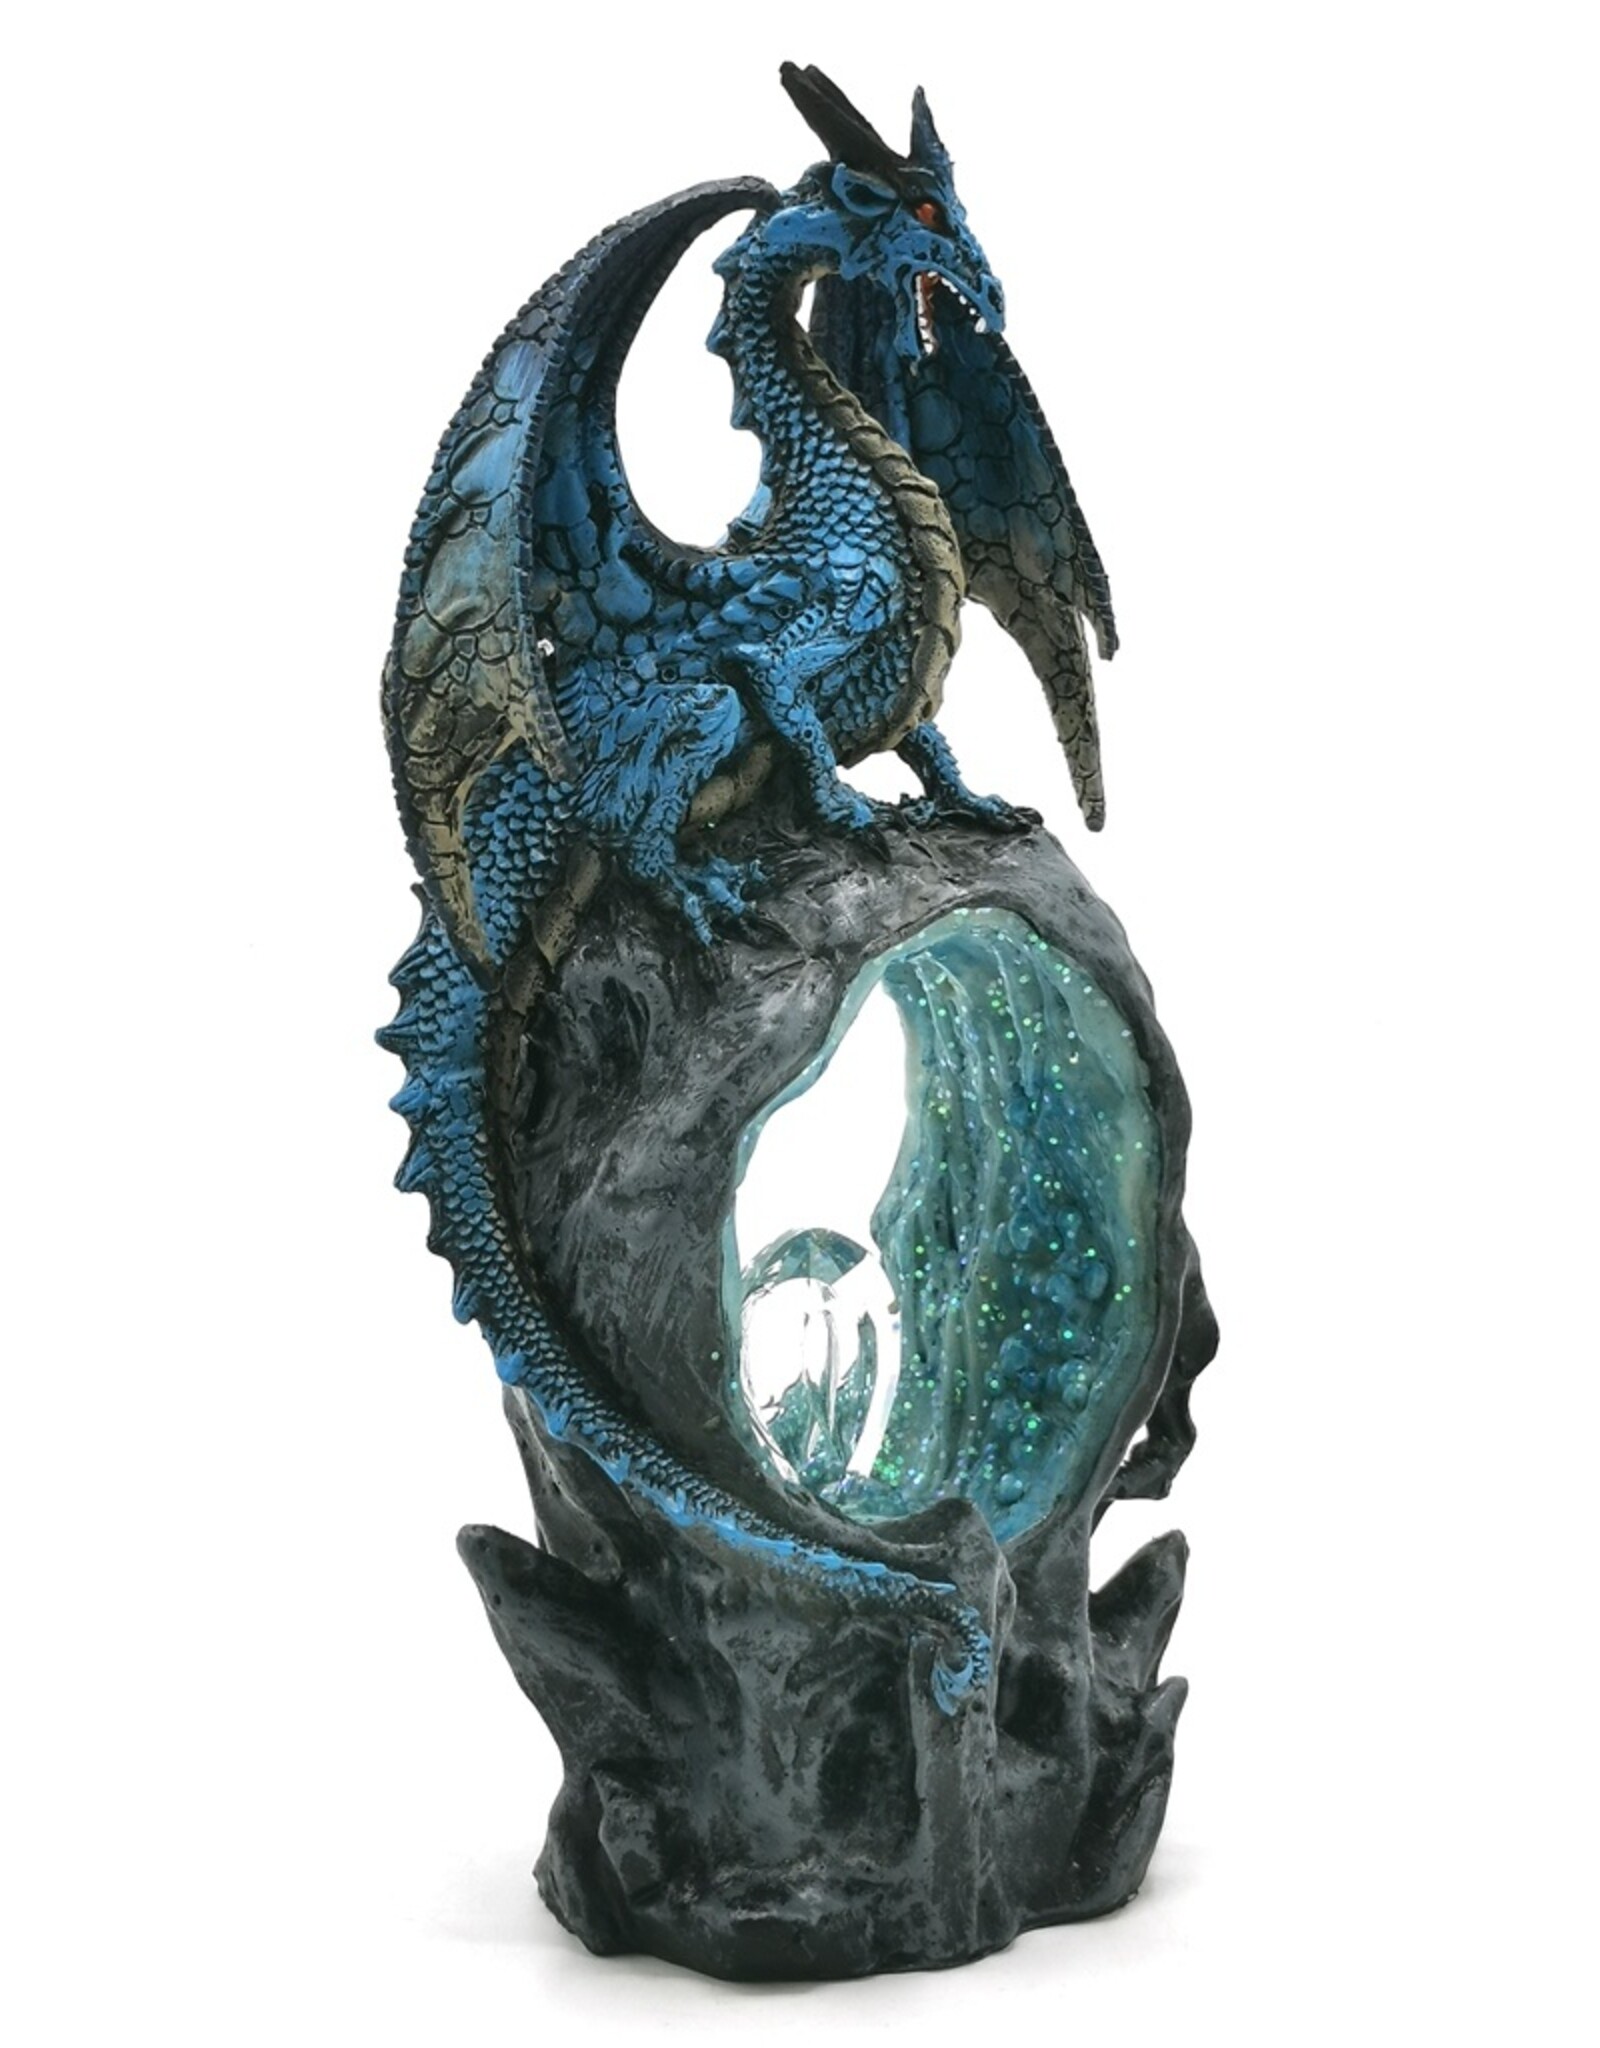 Alator Giftware Figurines Collectables - Frostwing's Gateway Figurine Blue Dragon Crystal LED 27cm